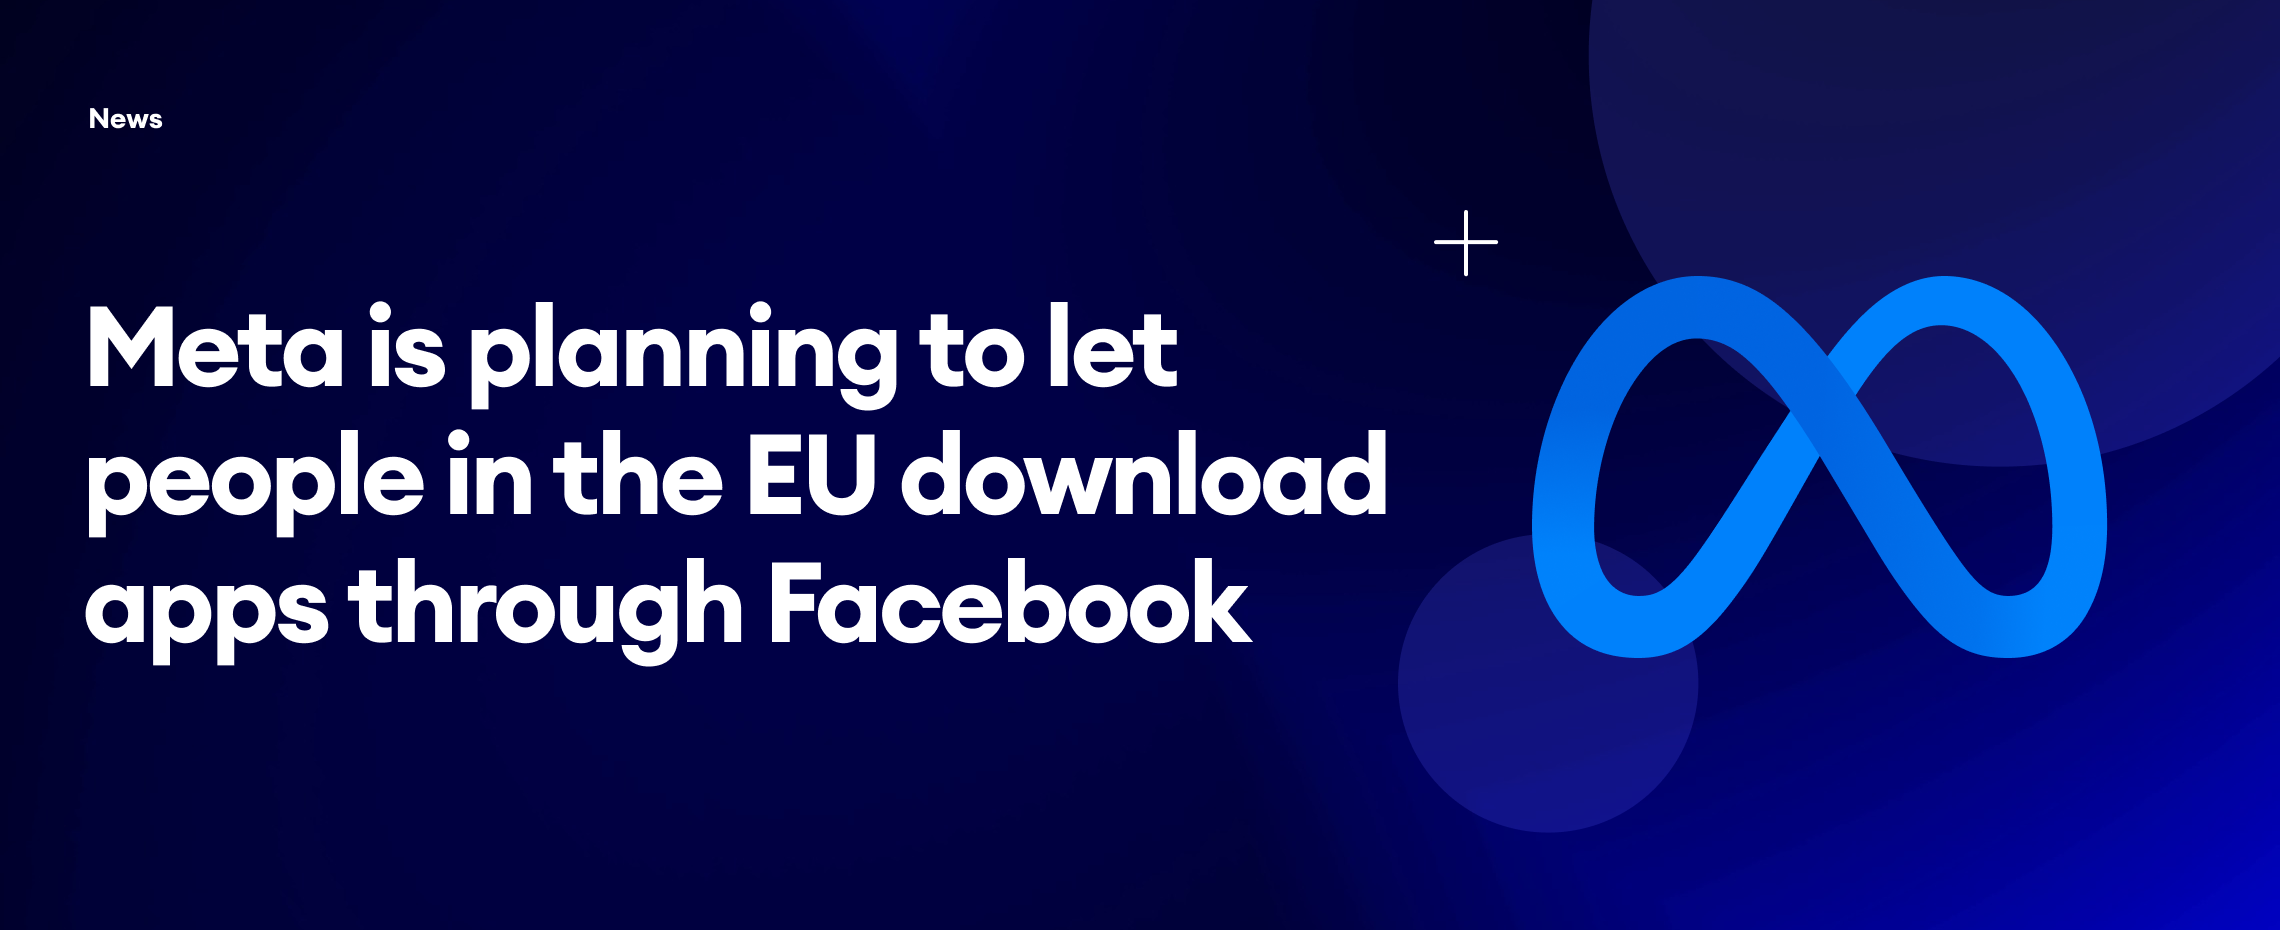 Meta is planning to let people in the EU download apps through Facebook